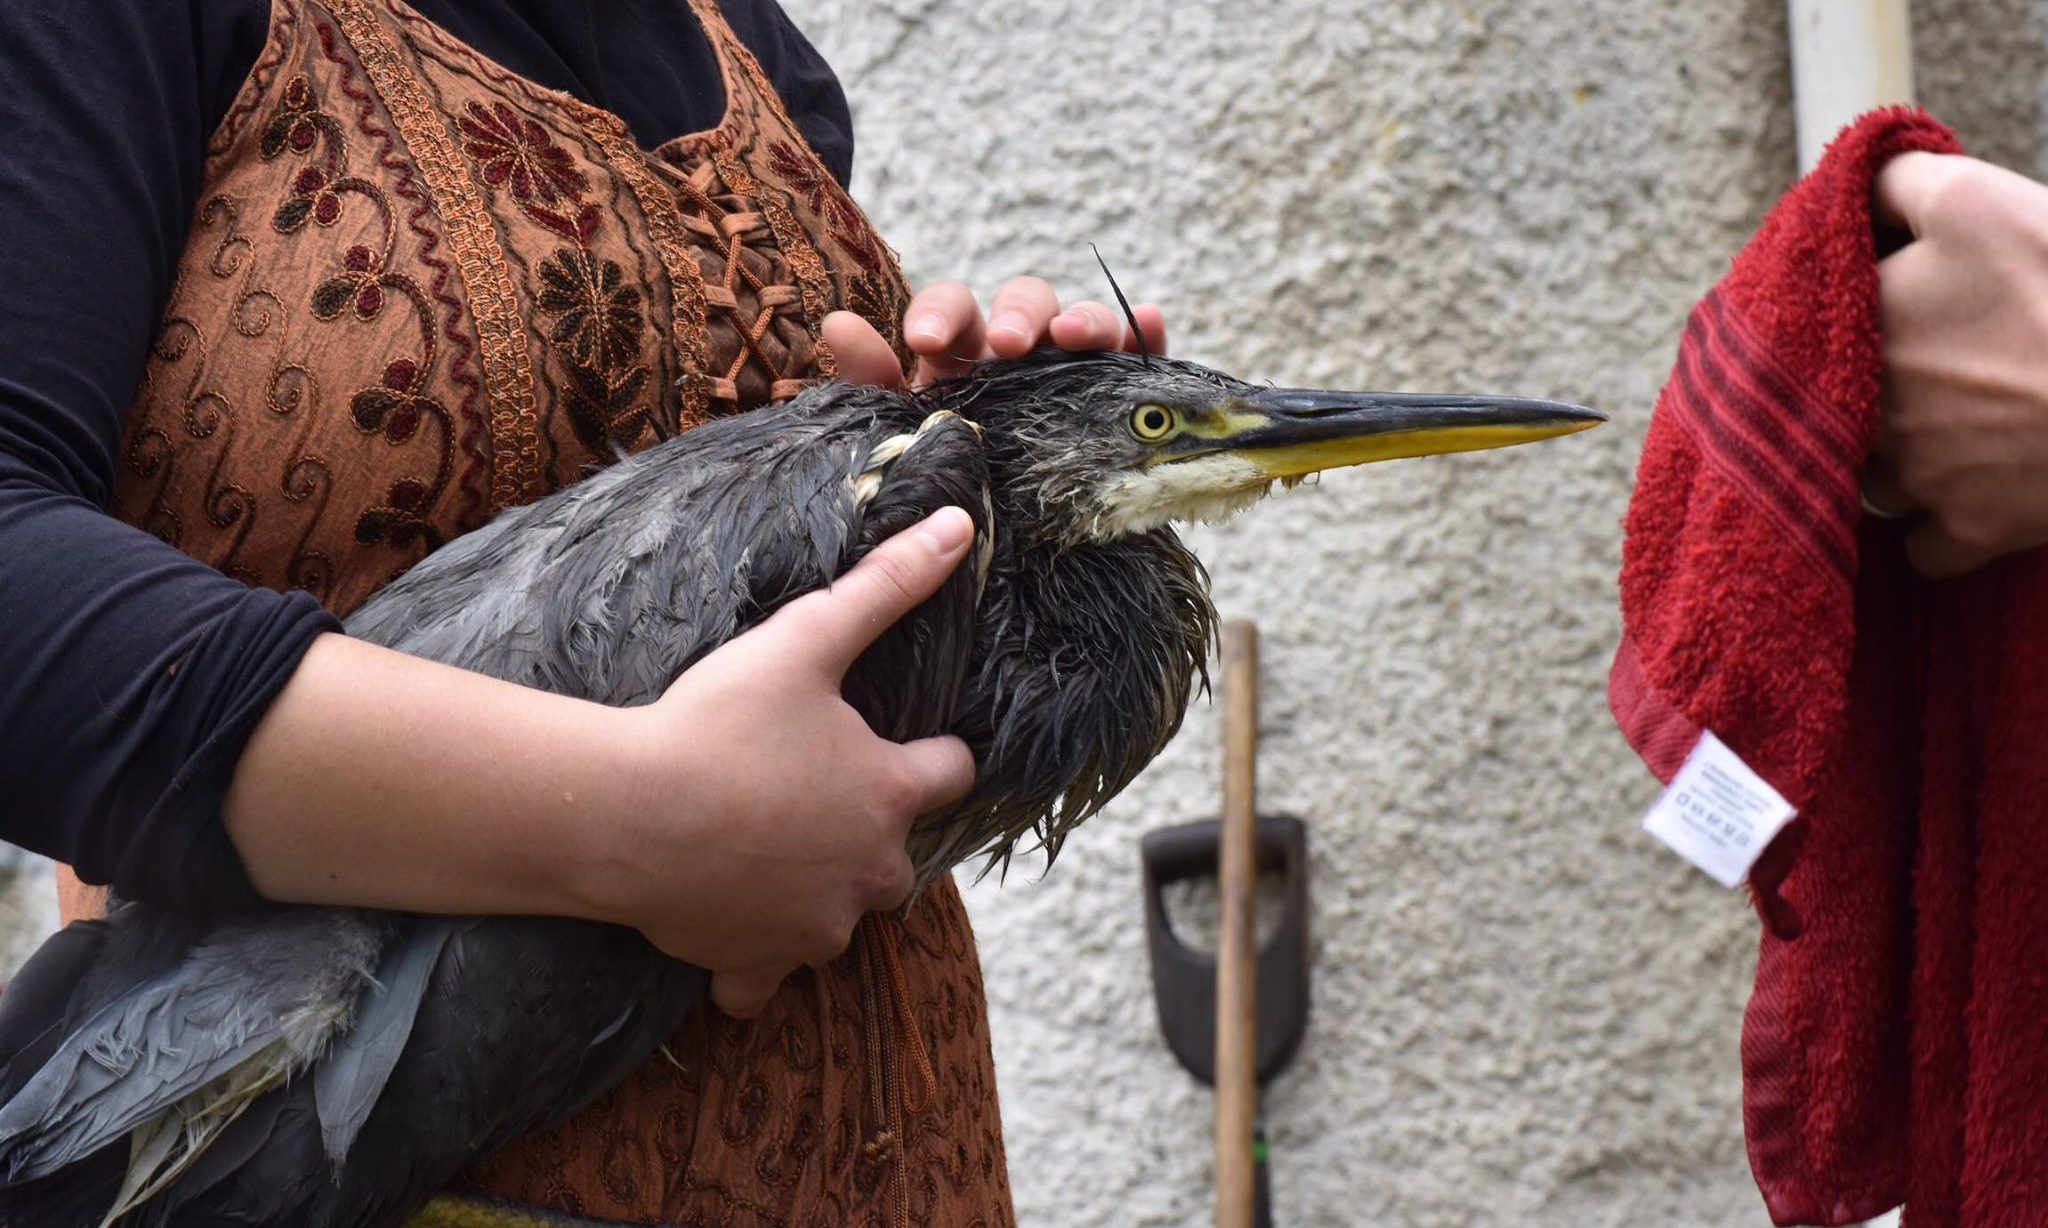 The heron Enya found was soaked in oil.